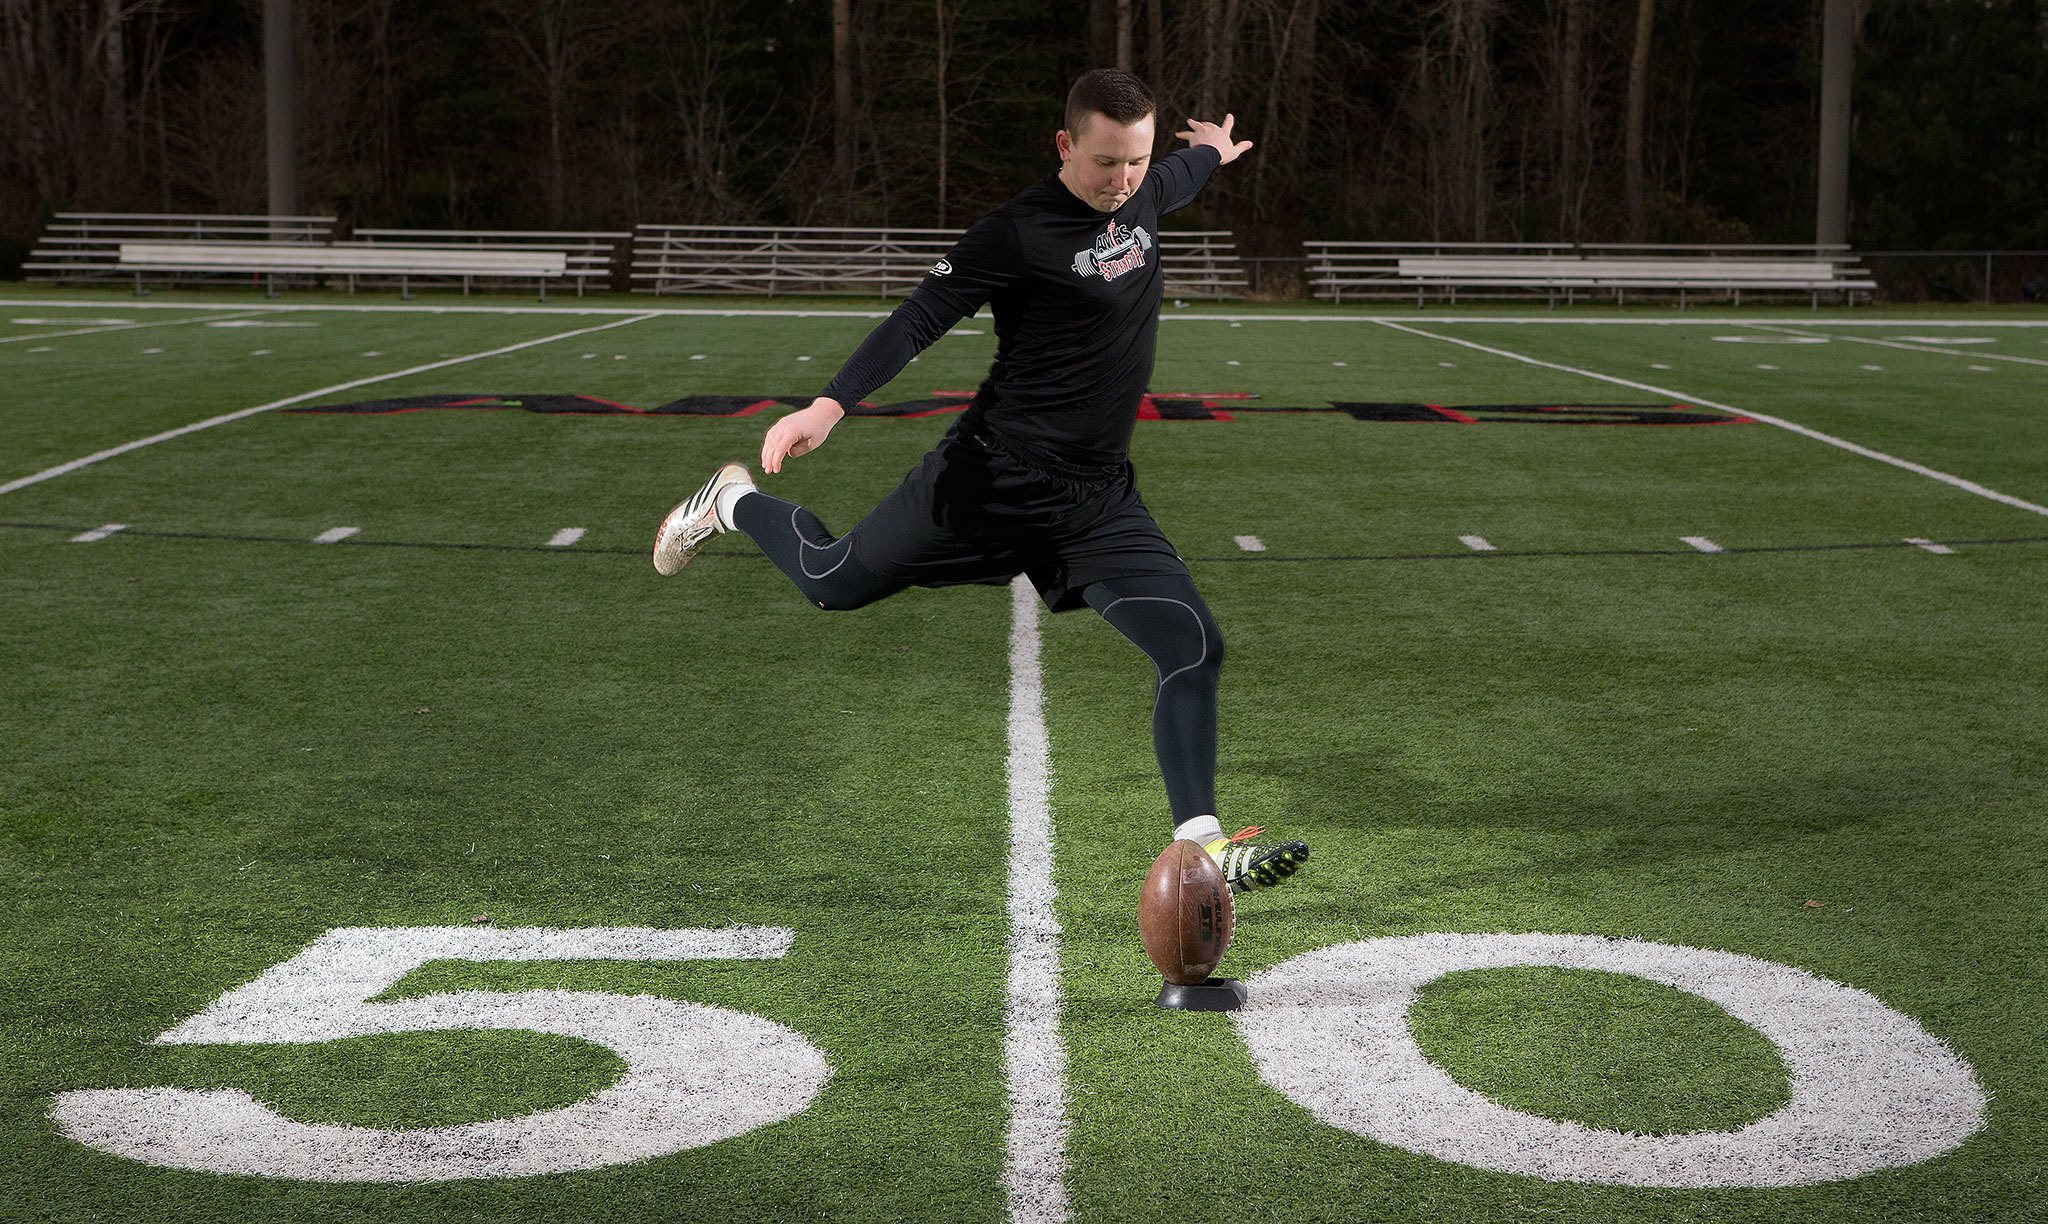 Archbishop Murphy senior kicker Ryan Henderson kicked field goals of 56, 54 and 50 yards this past season. Henderson has received a preferred walk-on offer from the University of Washington football program. (Andy Bronson / The Herald)